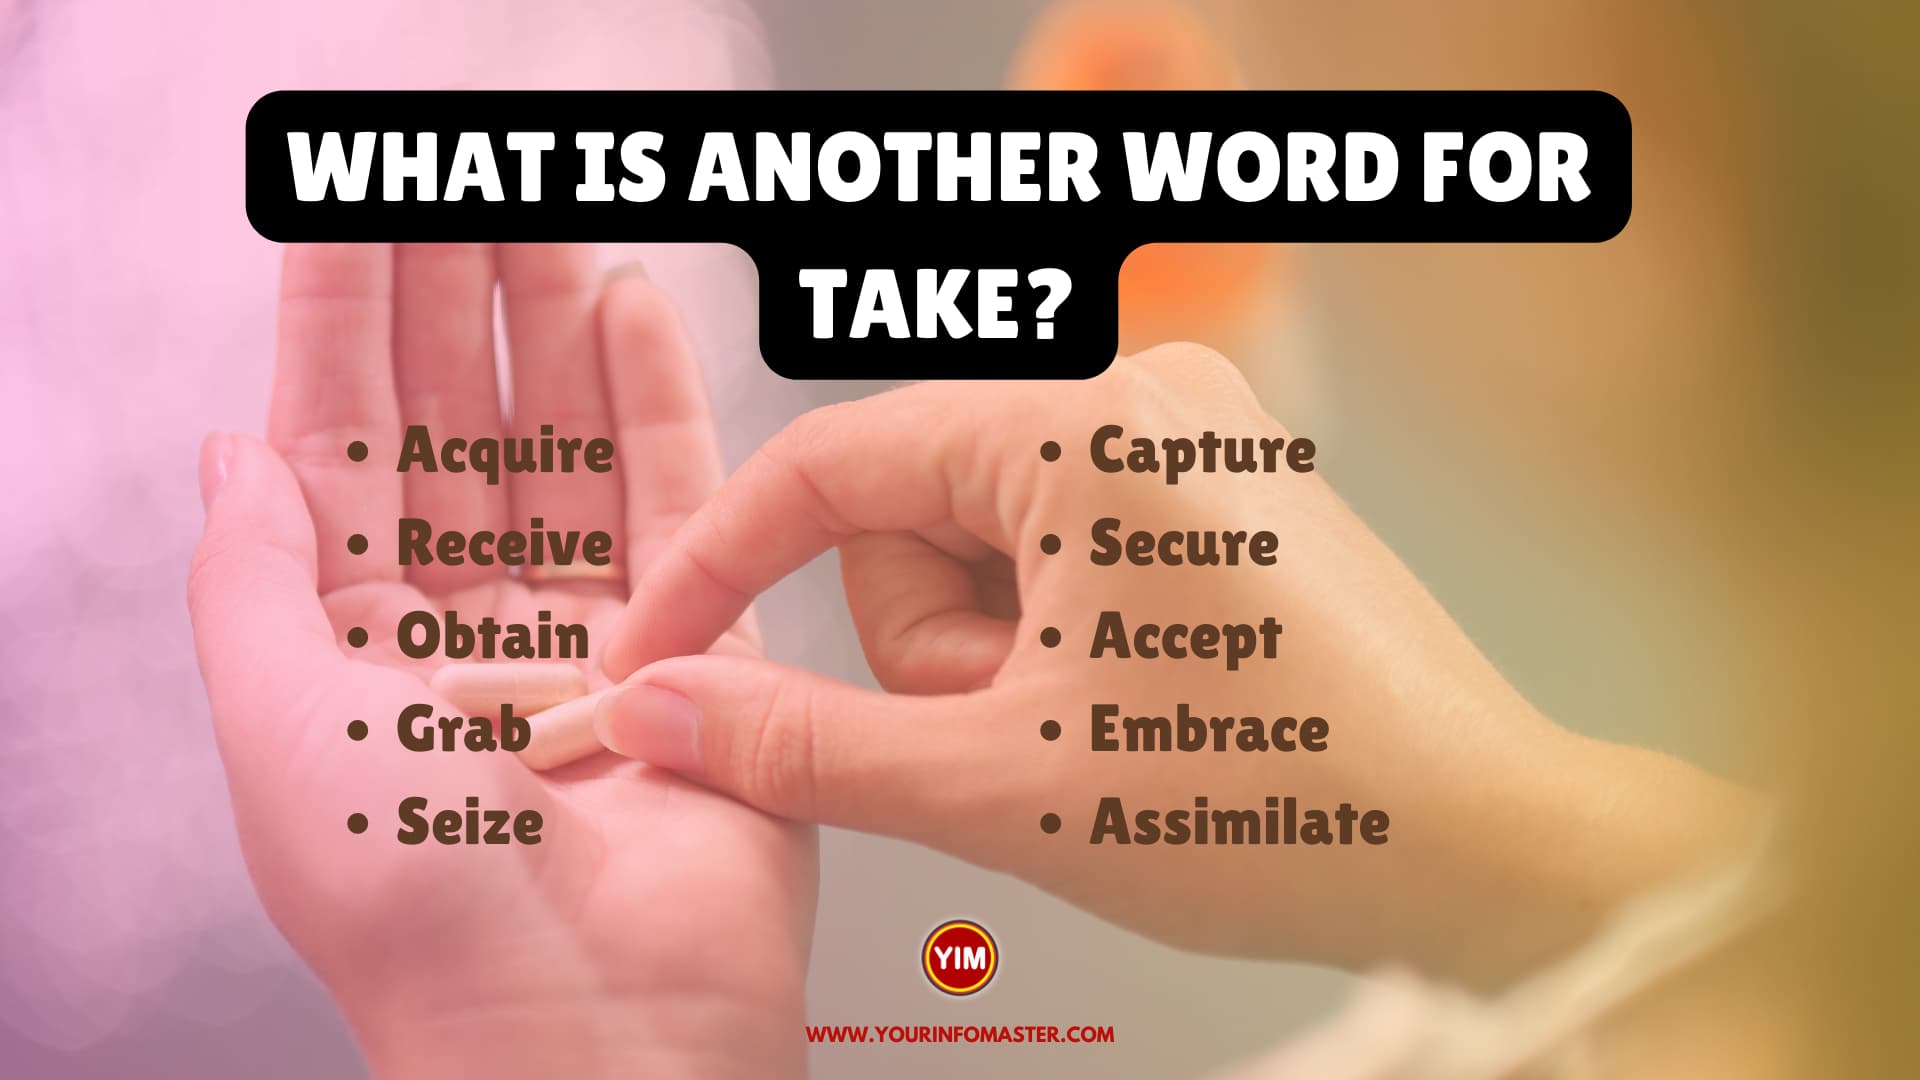 What is another word for Take